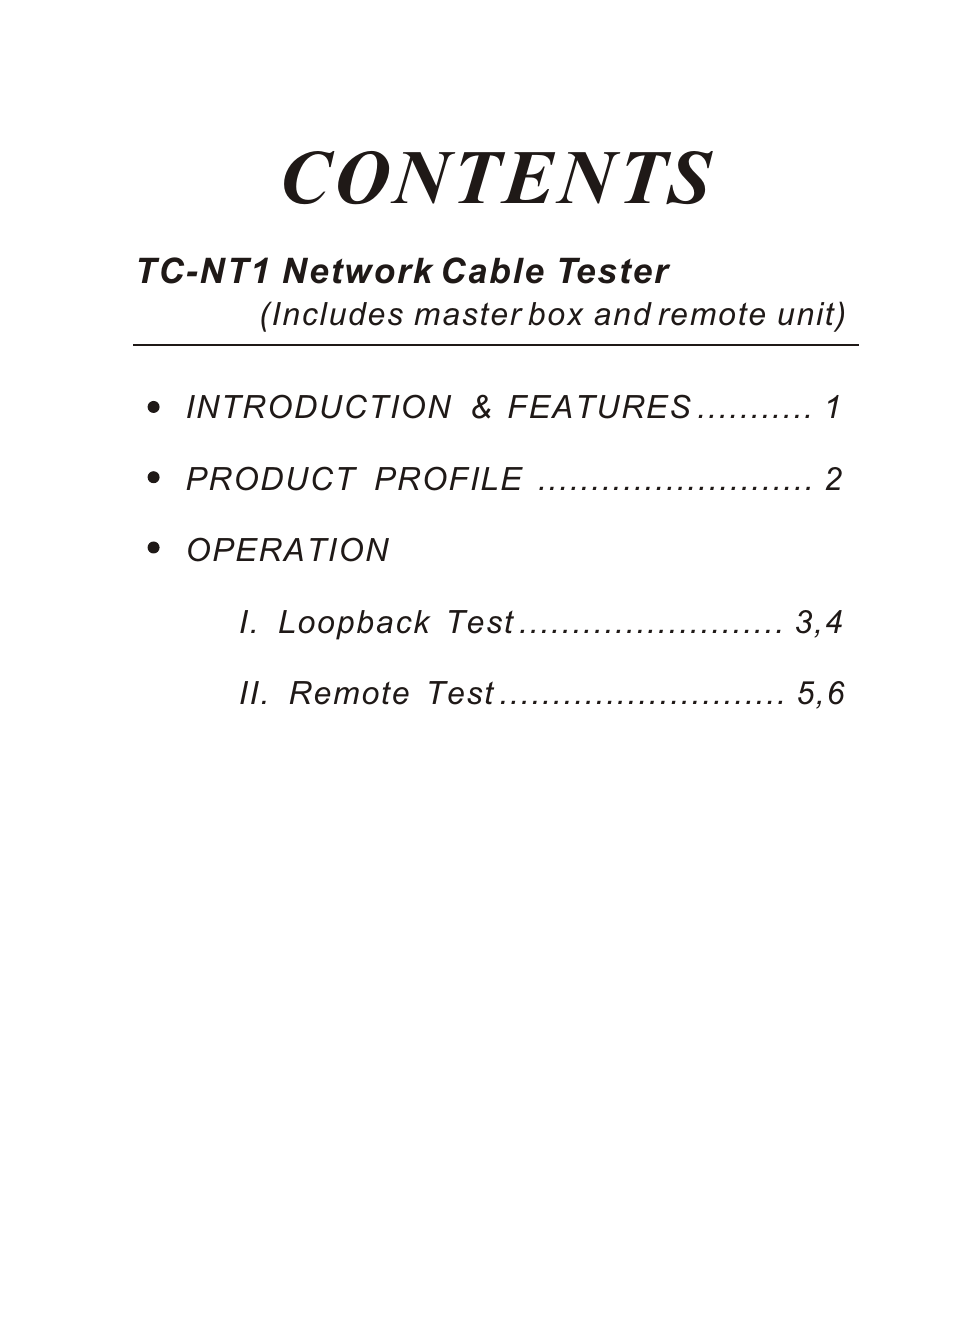 13138 TC-NT1 Network Cable Tester